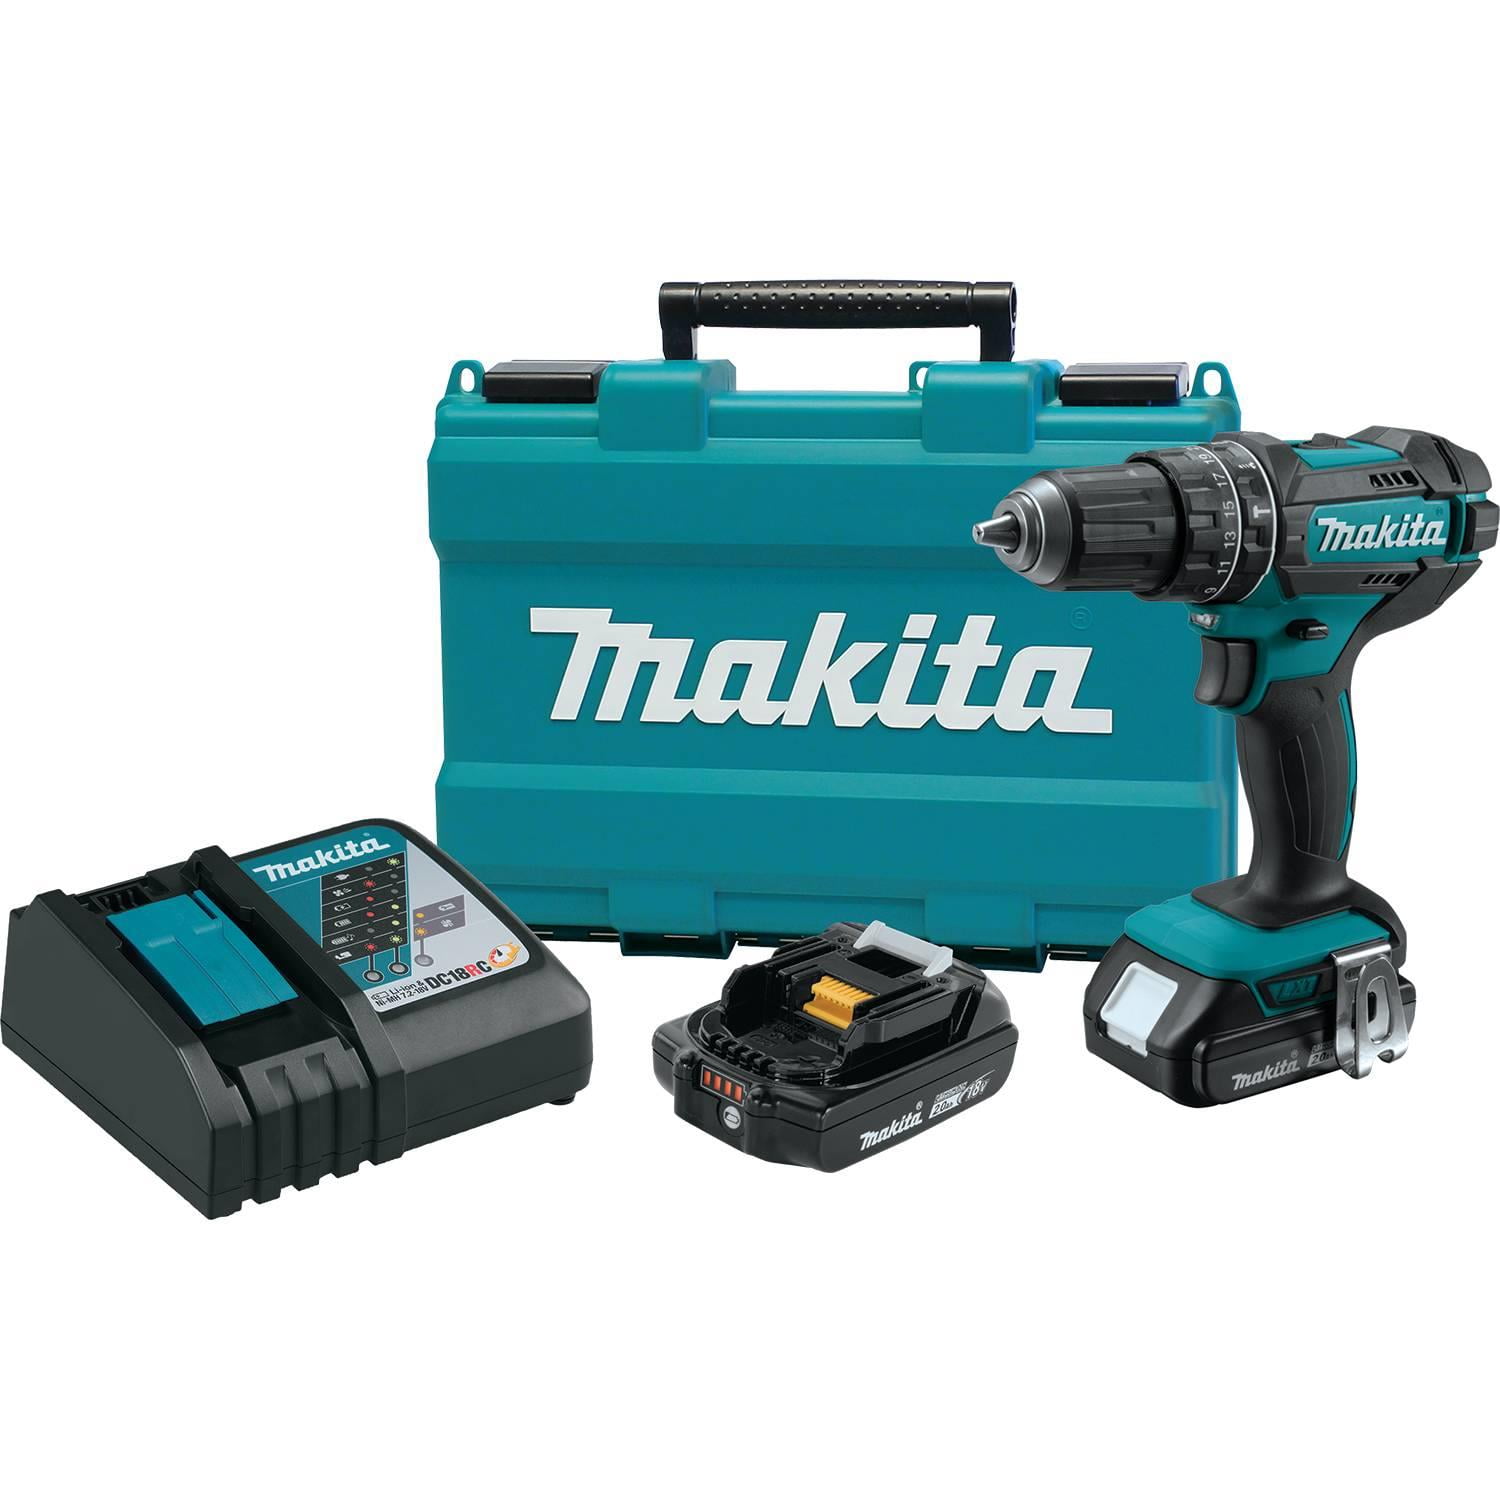 Carbon Brush for Makita BHP452 18V LXT Lithium-Ion Cordless 1/2" Hammer Drill-Dr 